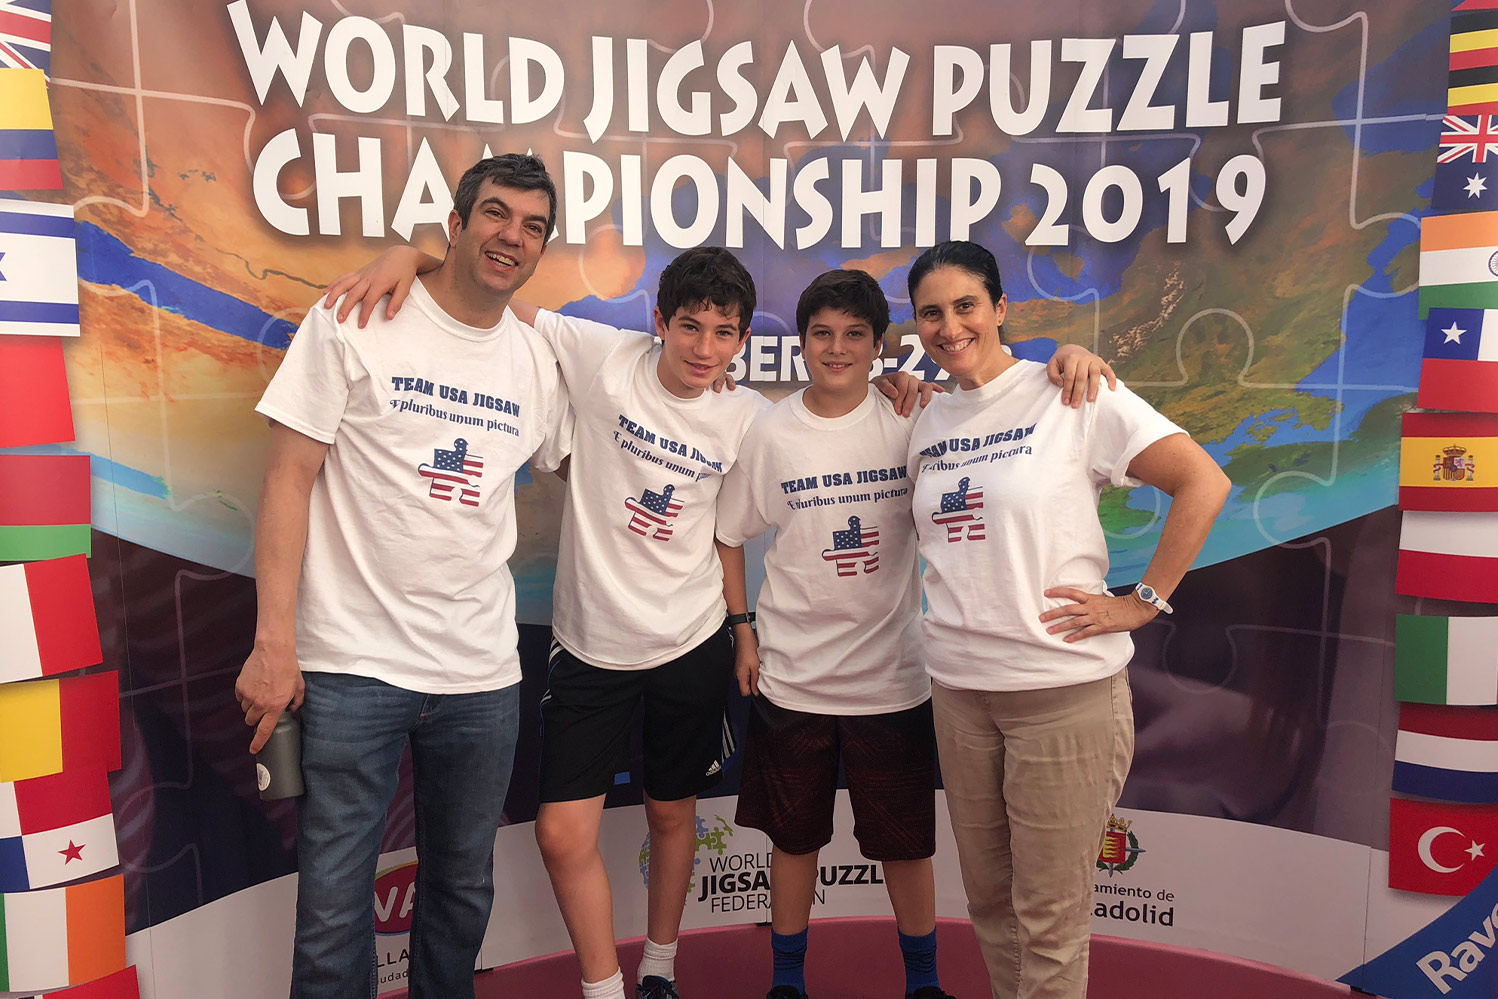 Podcast host, A.J., with two sons and wife, wearing matching "Team USA Jigsaw" shirts at the World Jigsaw Puzzle Championship 2019